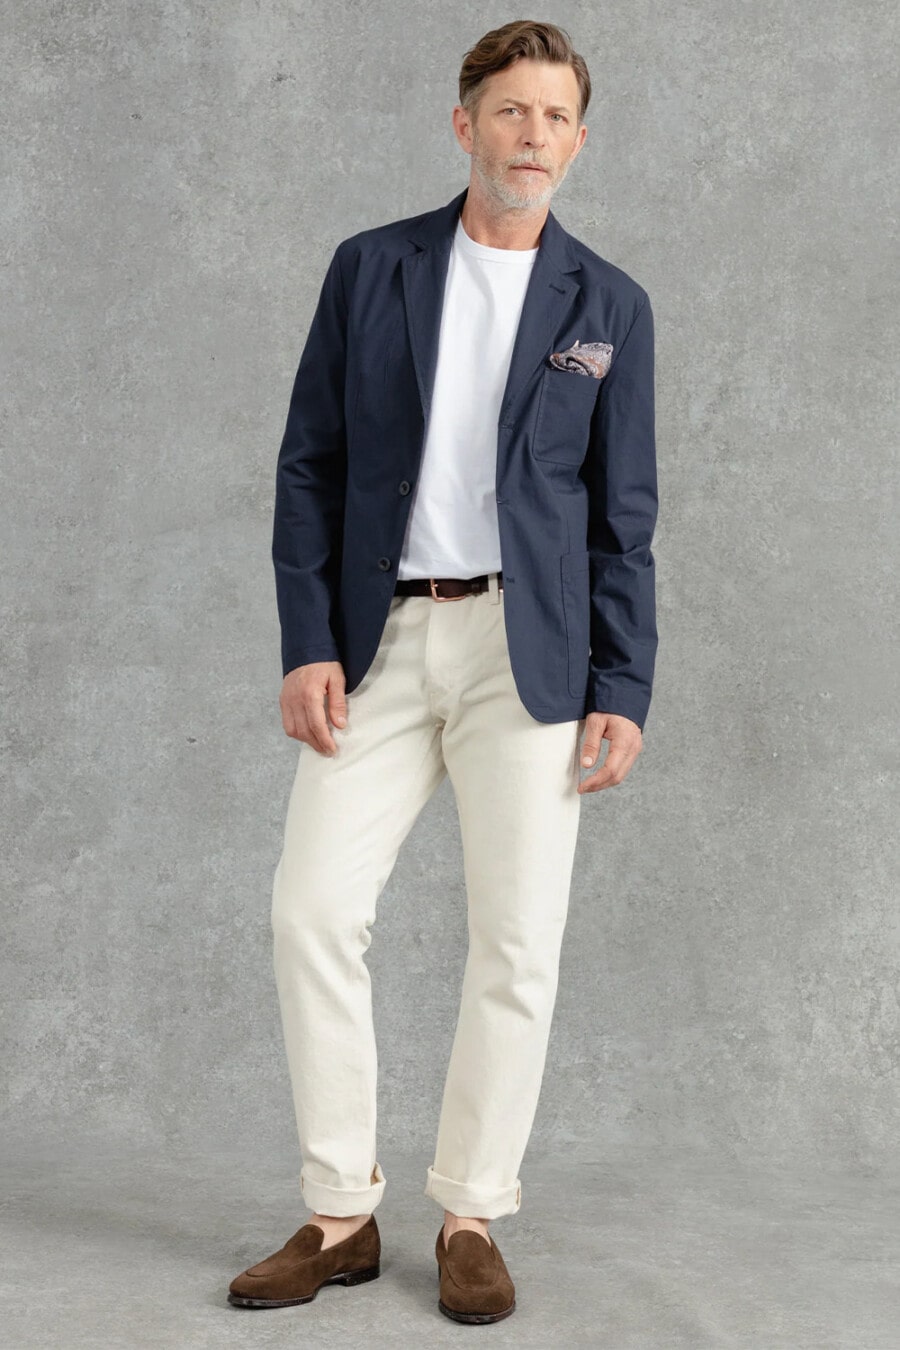 Men's off-white chinos, tucked in white T-shirt, navy unstructured blazer, brown suede Belgian loafers worn sockless and patterned pocket square outfit